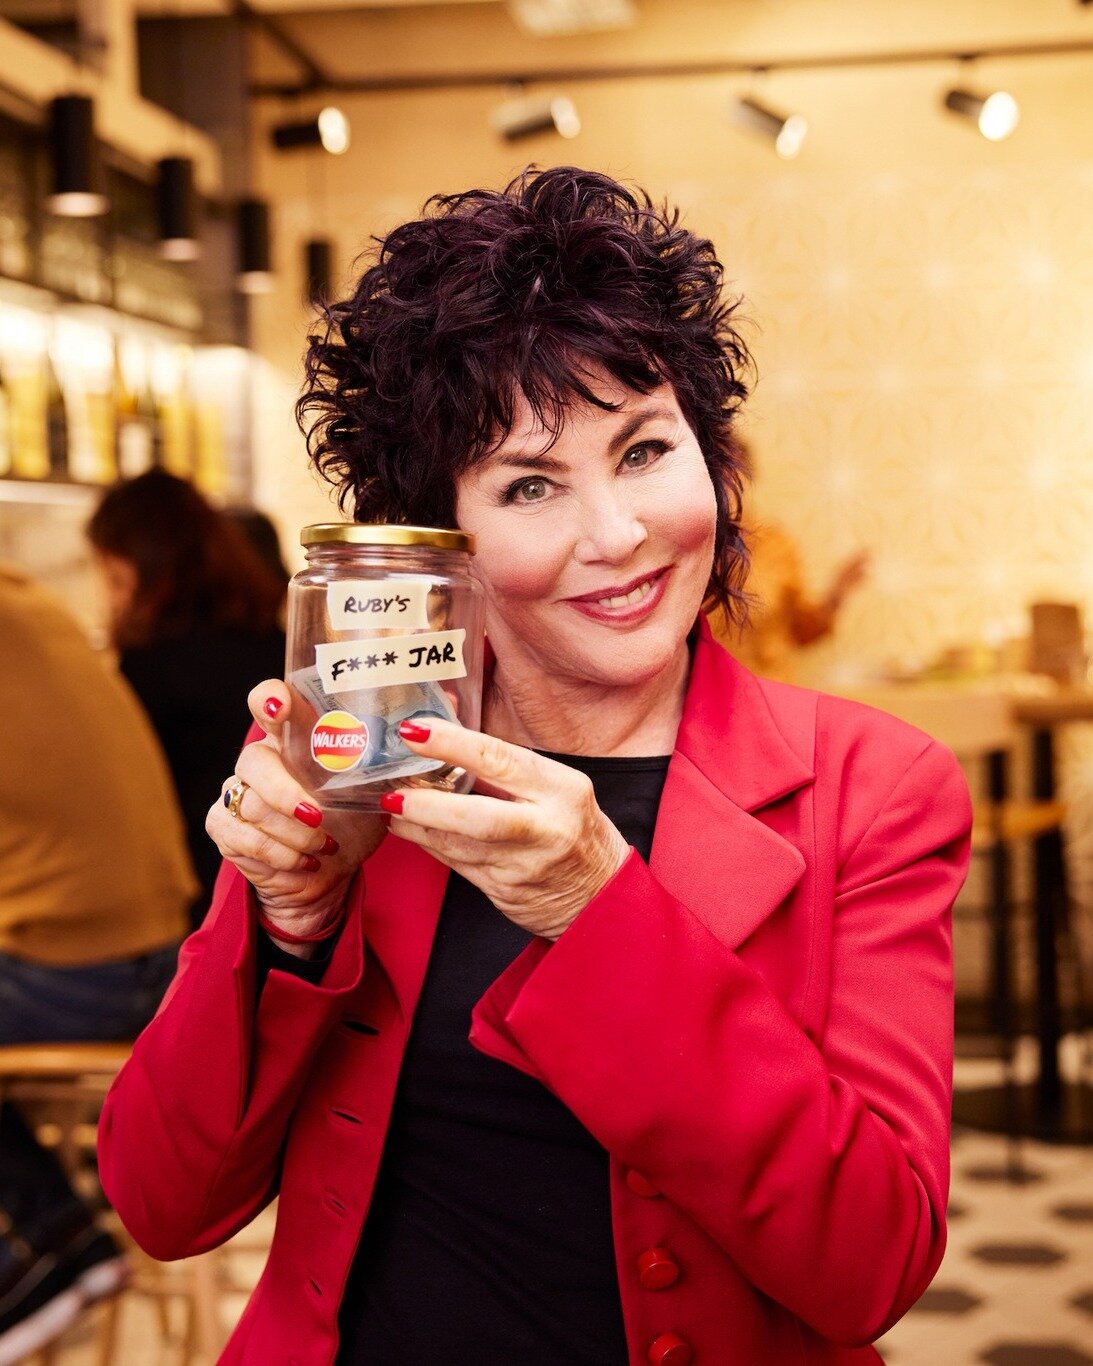 Client Spotlight 🔦
Ruby Wax

@rubywax was looking for a social team with experience in entertainment to not only grow and help manage her social media presence, but to also work closely with her wider team on promoting her many projects, partnership